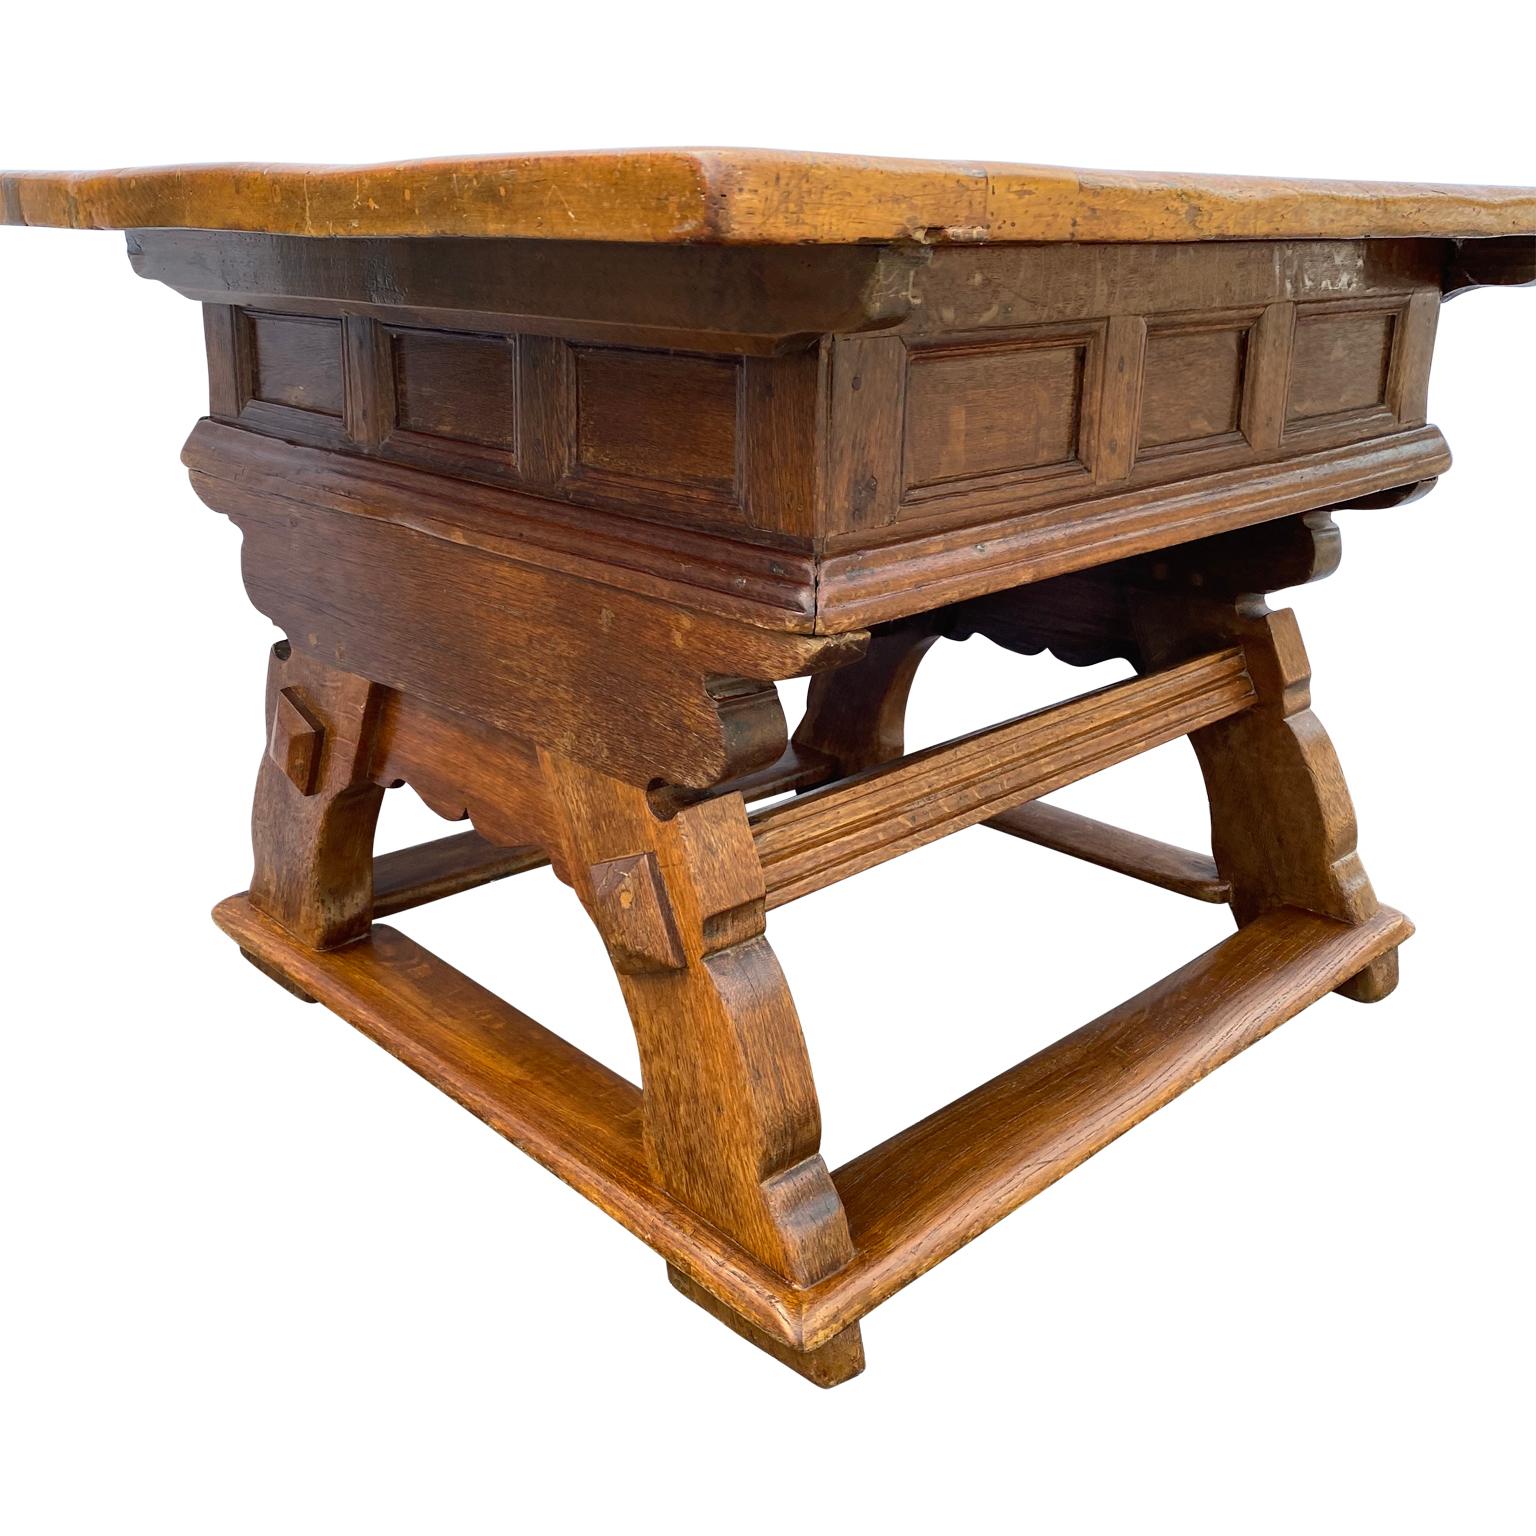 German baroque refectory kitchen table, circa 1740.
Top of table slides back and forth, please see attached pictures.